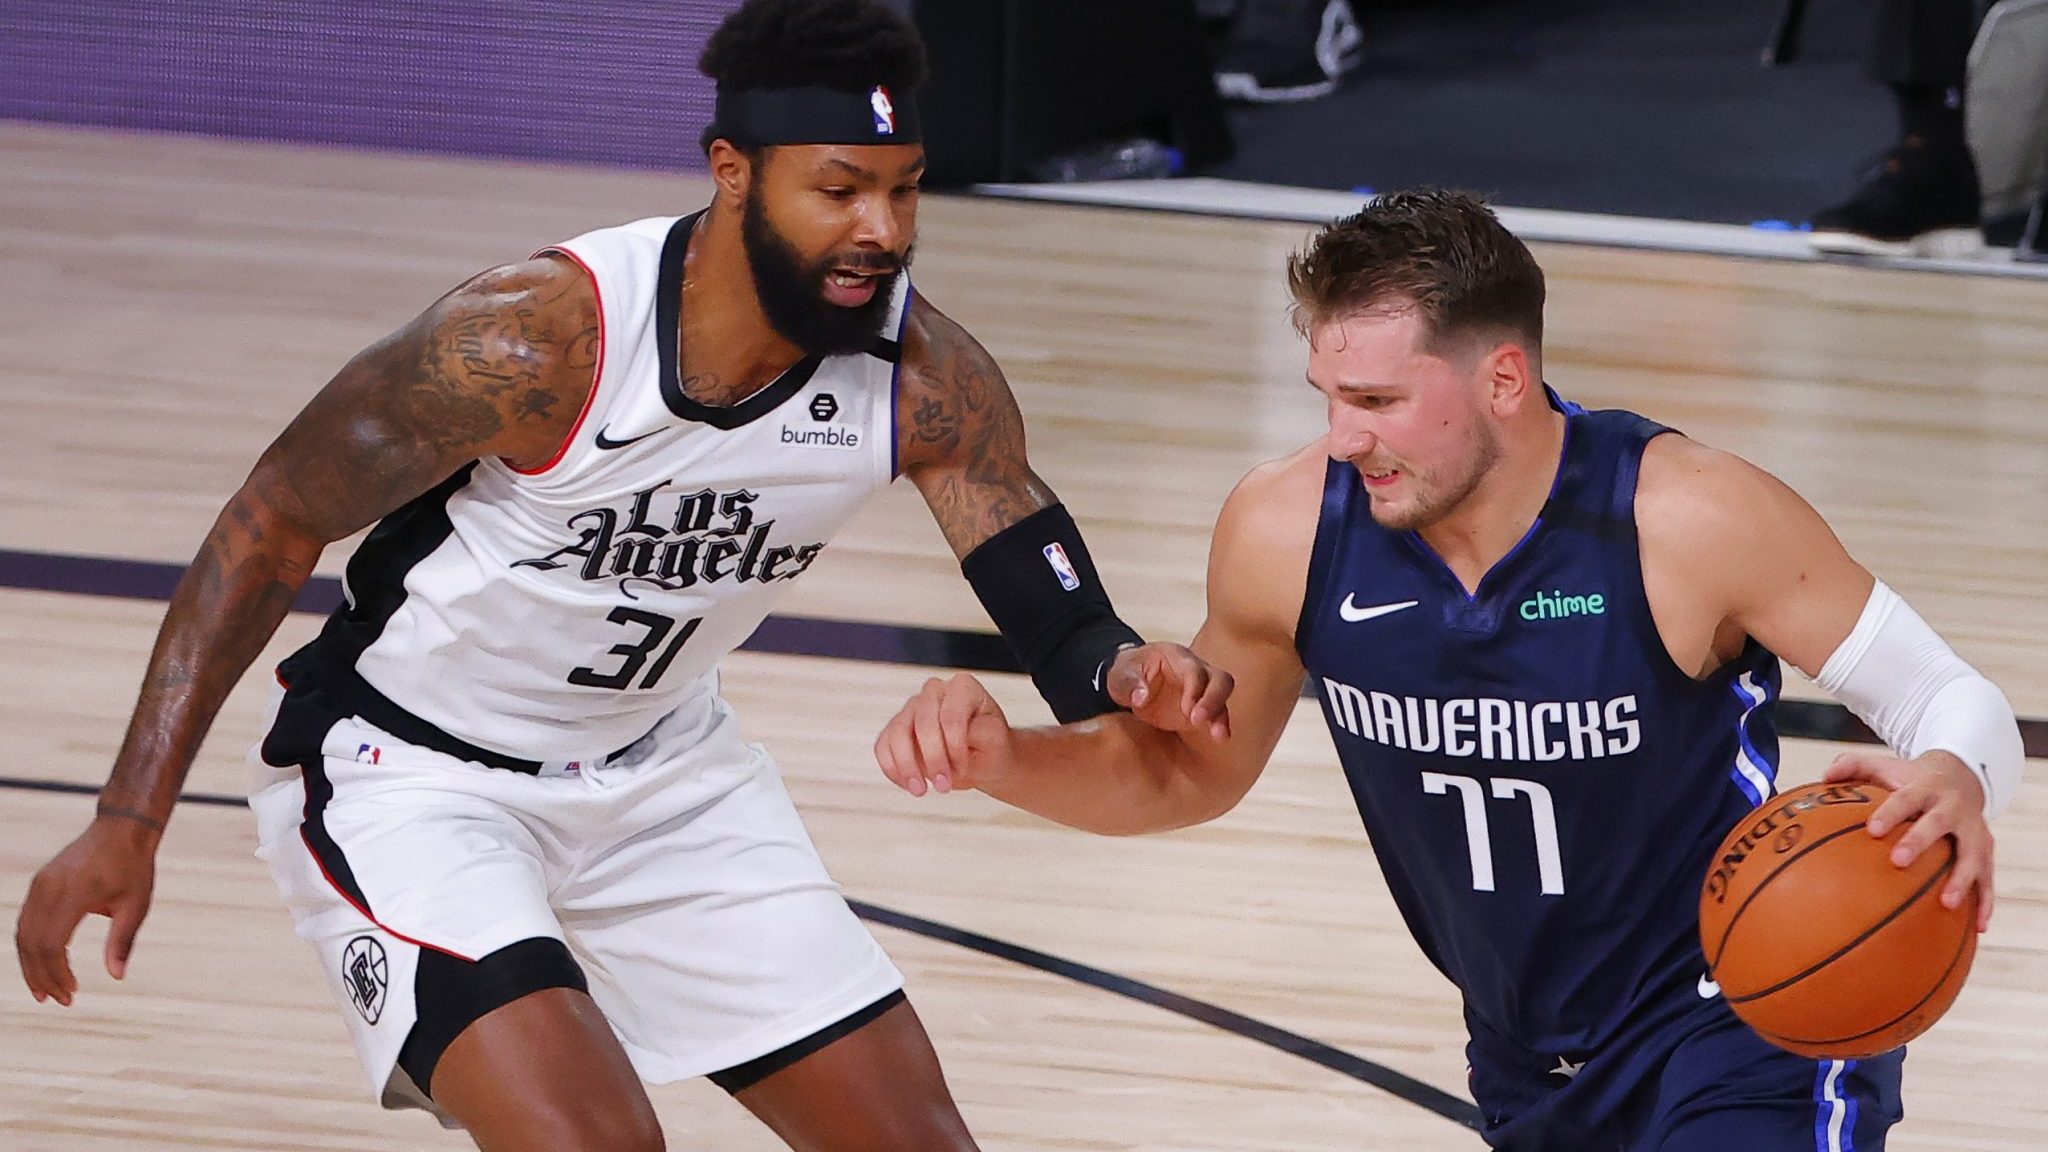 LAKE BUENA VISTA, FLORIDA - AUGUST 23: Luka Doncic #77 of the Dallas Mavericks drives against Marcus Morris Sr. #31 of the LA Clippers during the first quarter in Game Four of the Western Conference First Round during the 2020 NBA Playoffs at AdventHealth Arena at ESPN Wide World Of Sports Complex on August 23, 2020 in Lake Buena Vista, Florida. NOTE TO USER: User expressly acknowledges and agrees that, by downloading and or using this photograph, User is consenting to the terms and conditions of the Getty Images License Agreement.